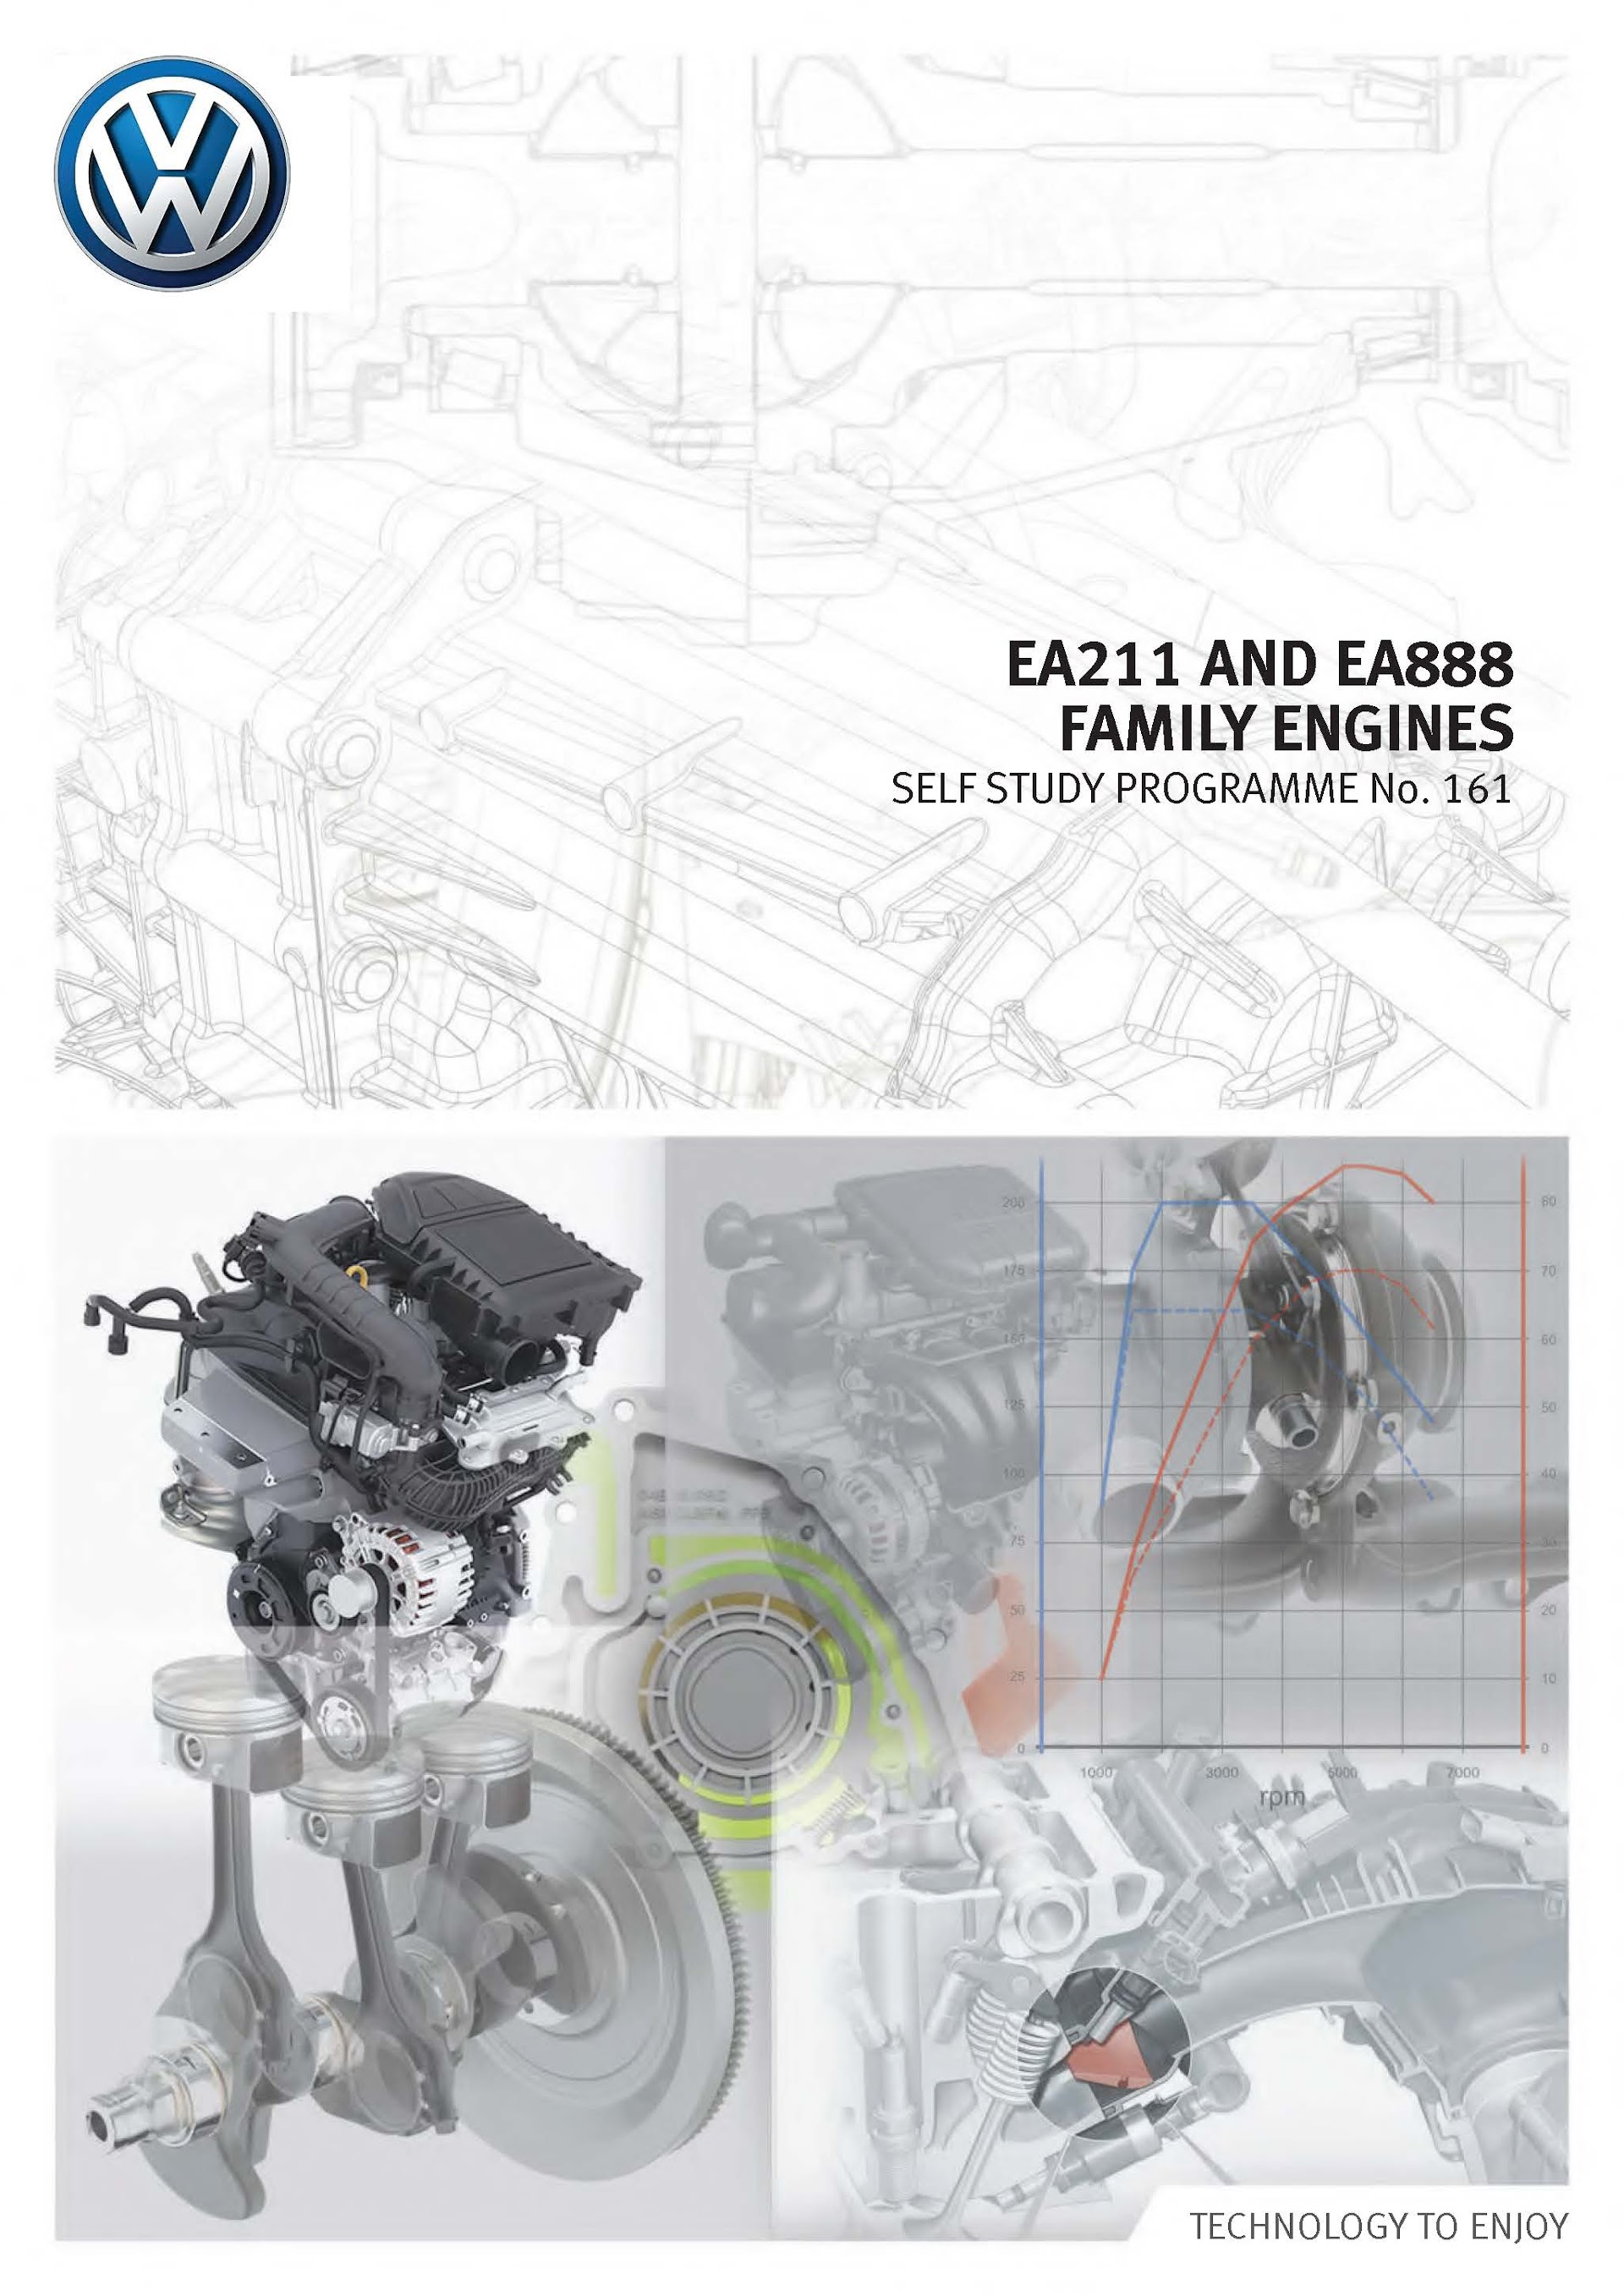 Volkswagen Family Engines EA211 And EA888